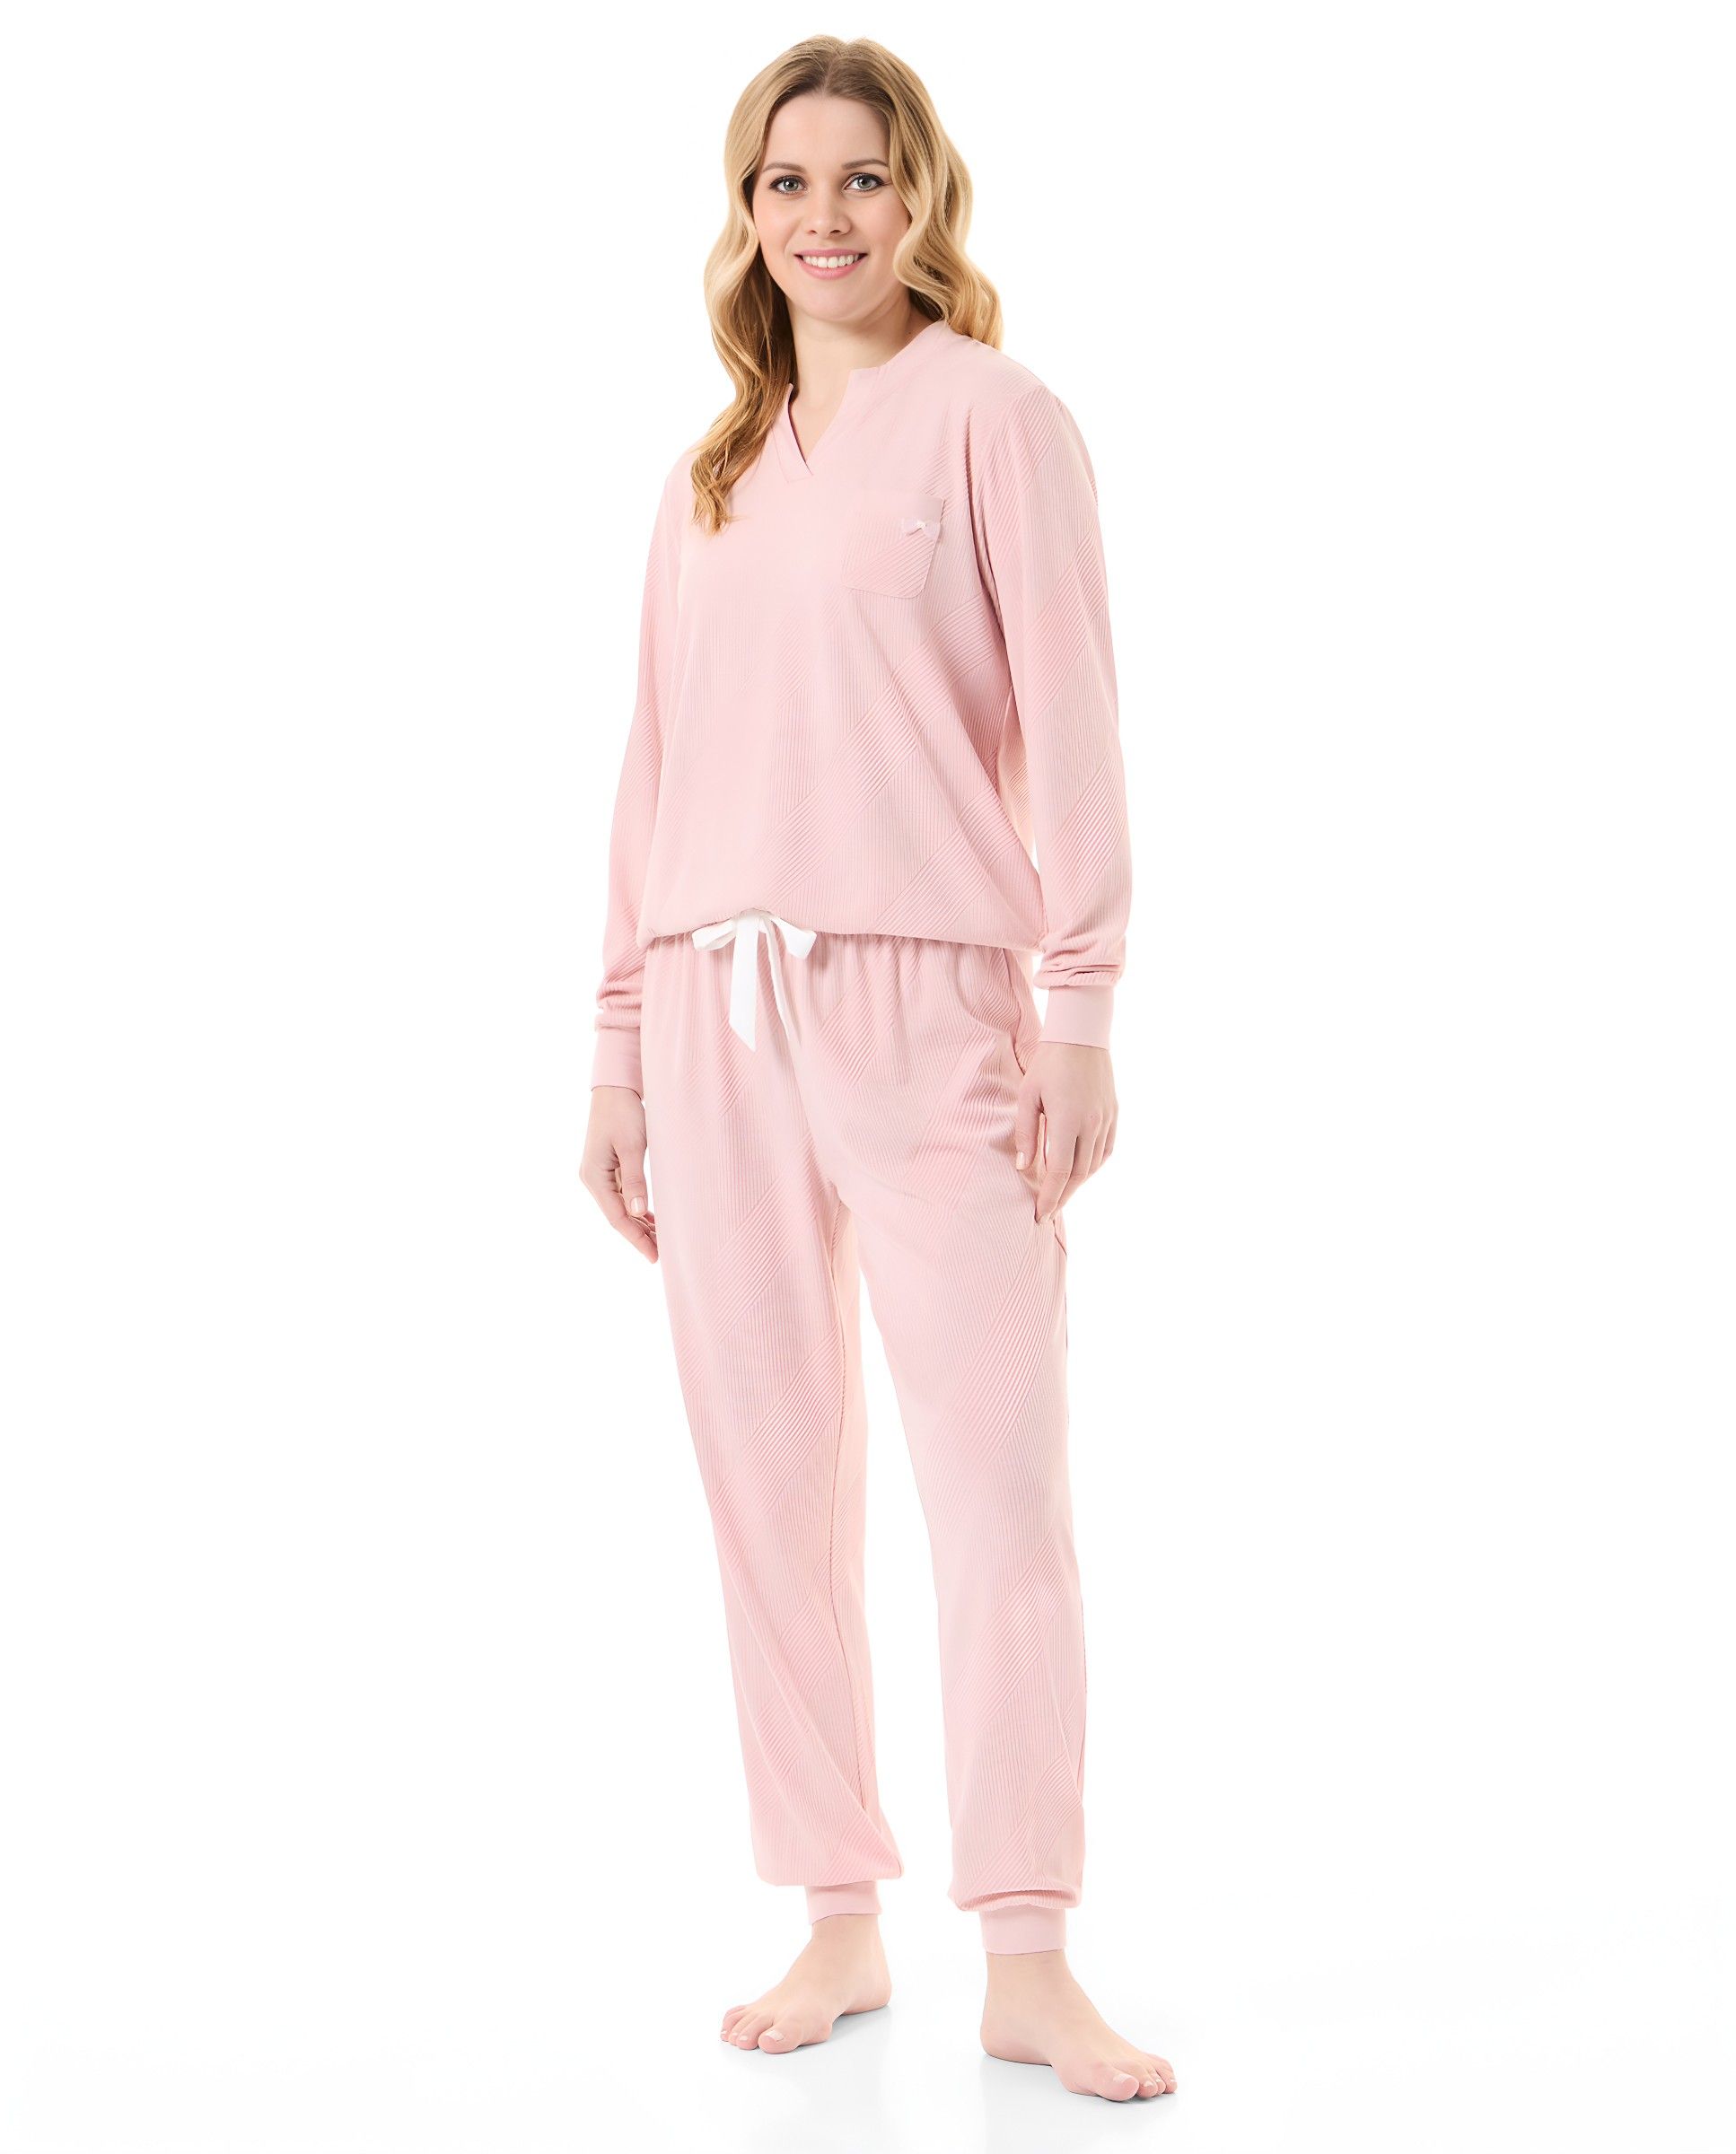 Women's winter pyjamas with long-sleeved jacket, pink ribbed V-neck and trousers with pockets.